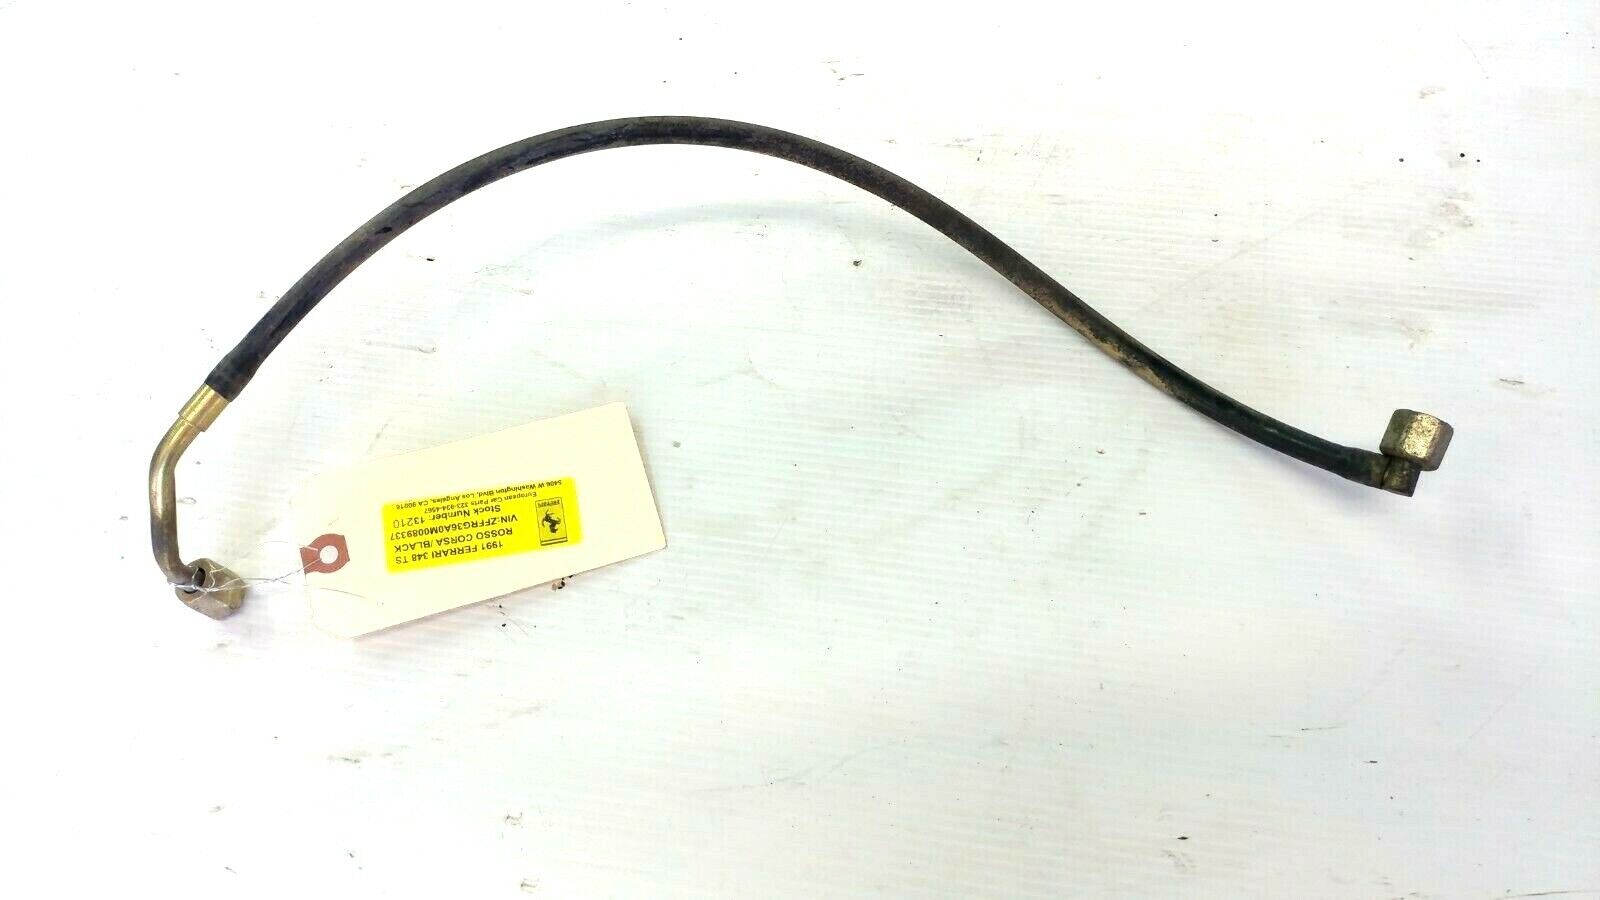 FERRARI 348 PARTS M0089337 FUEL HOSE PIPE FROM PUMP TO FILTER 141724 RIGHT SIDE